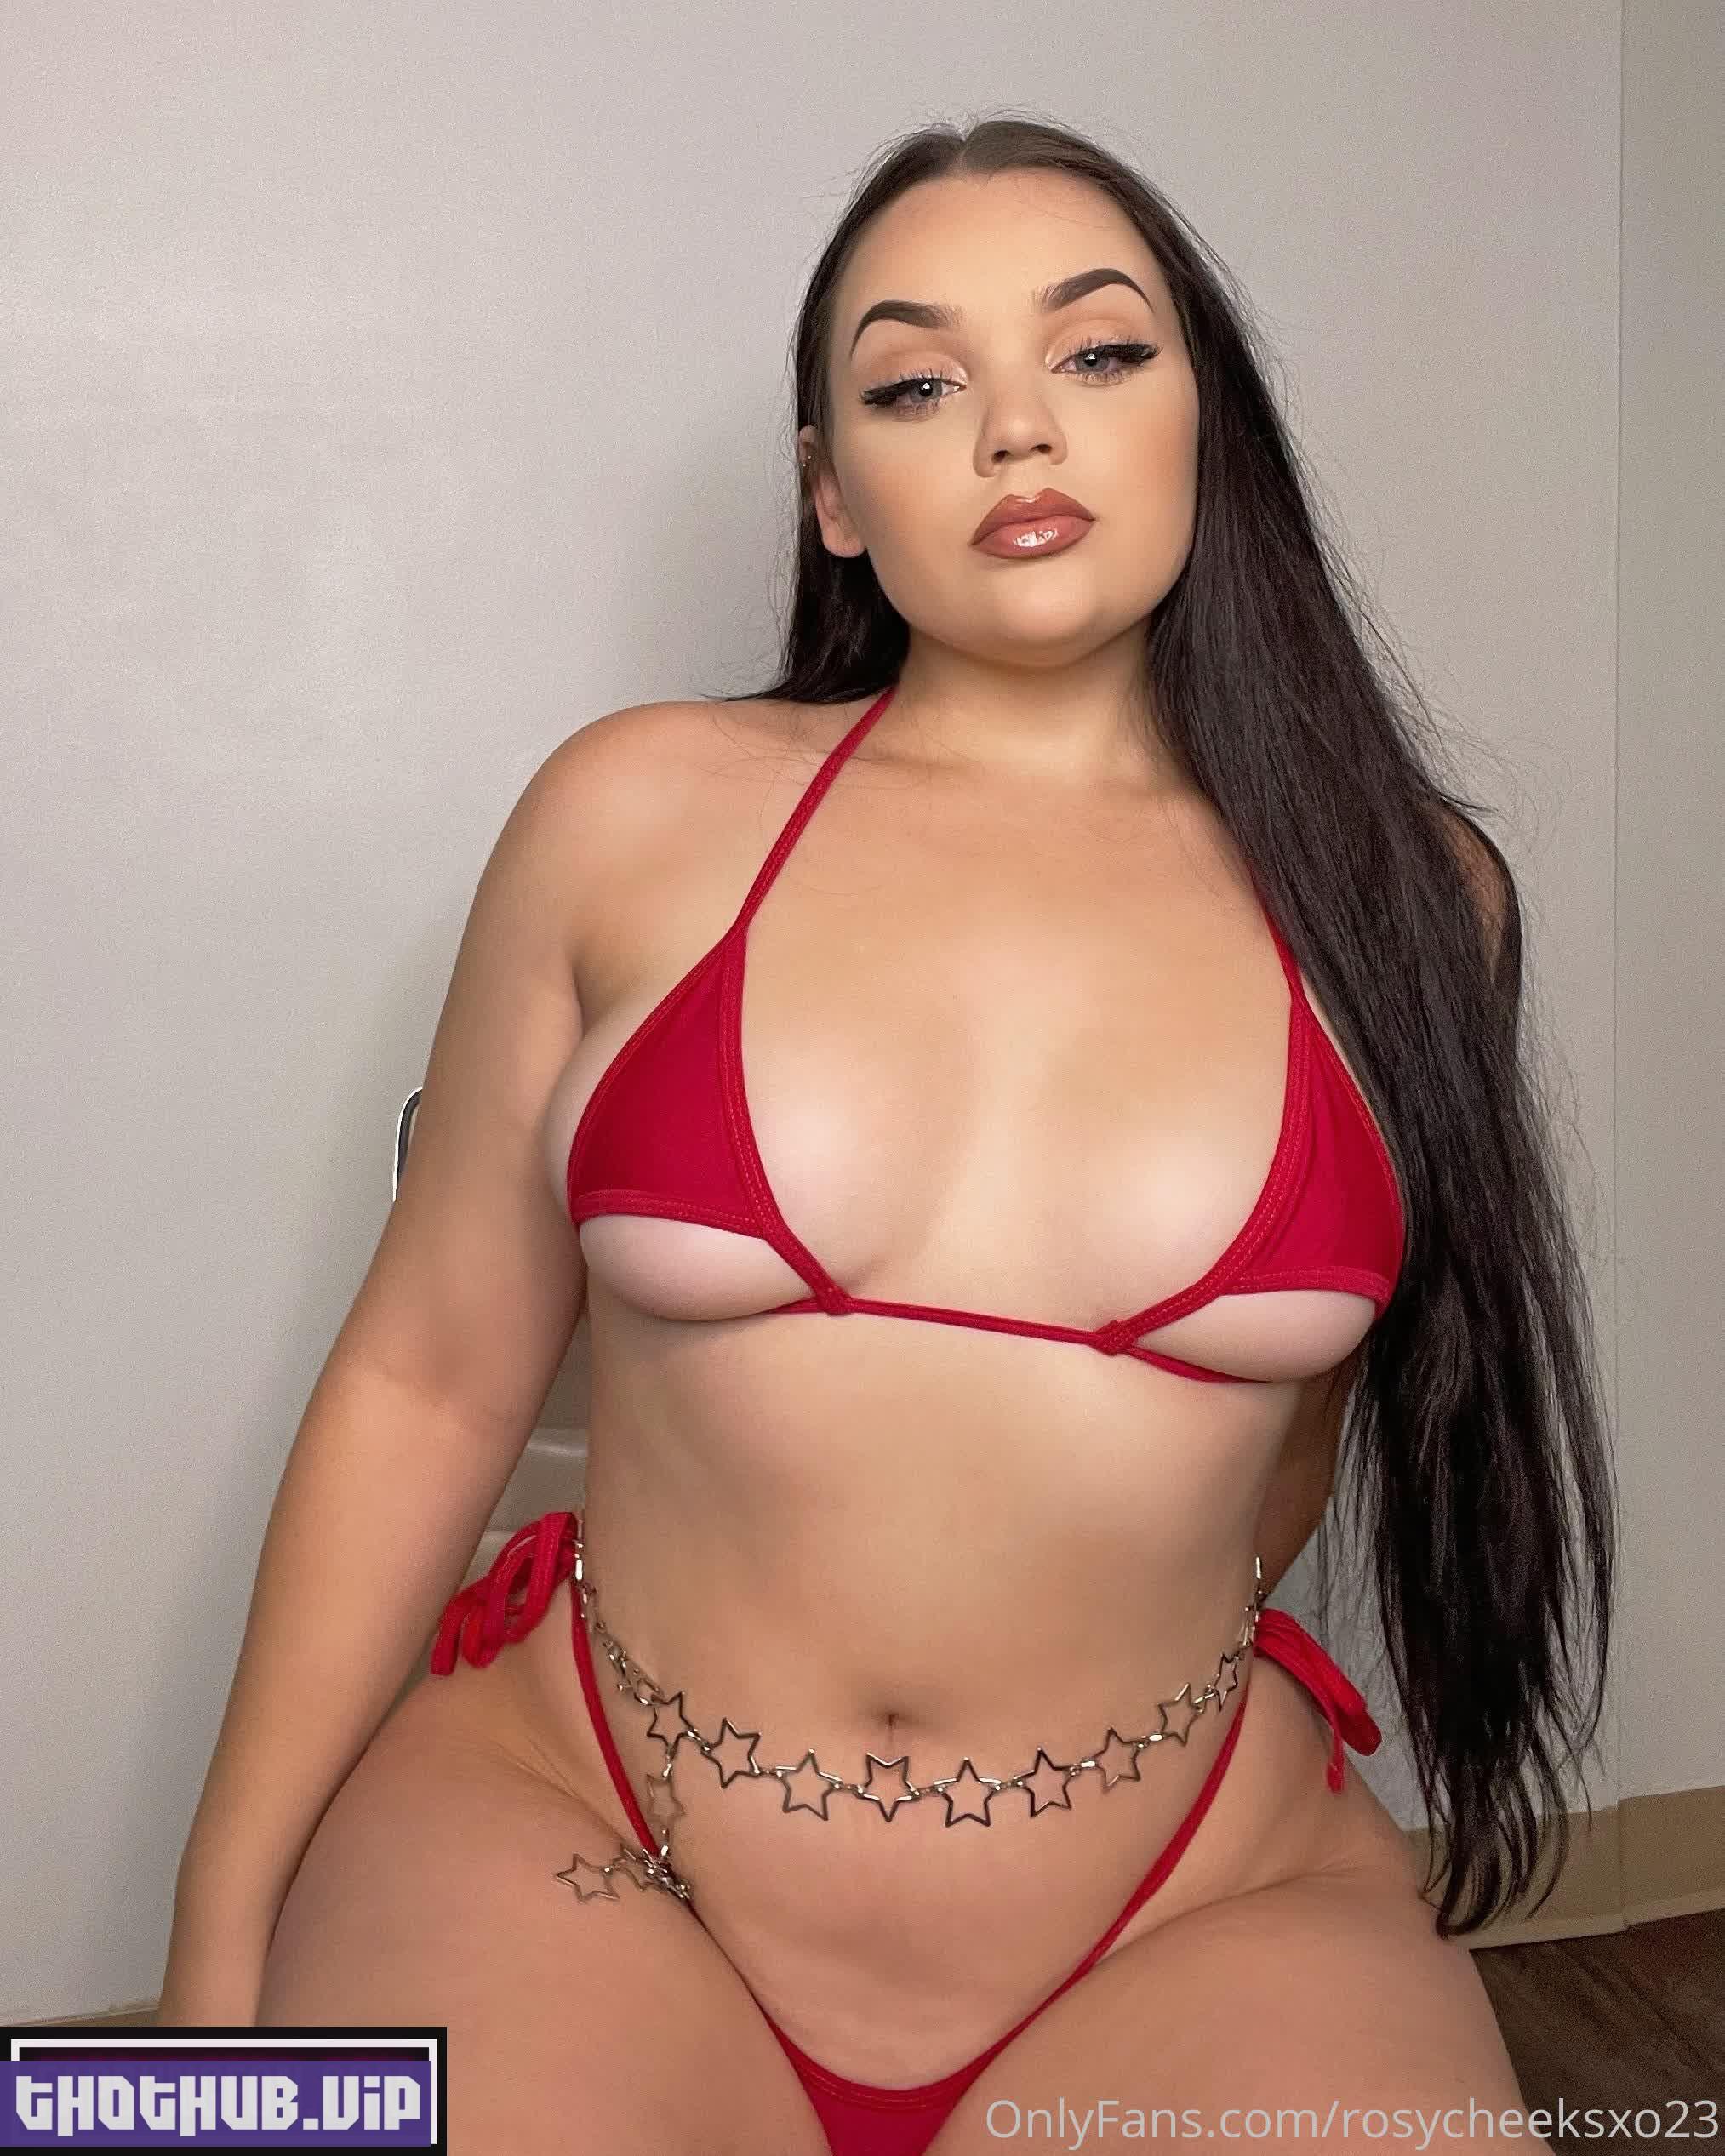 1694982018 22 Rosycheeksxo23 %E2%80%93 Thick Teen Babe Onlyfans Nudes